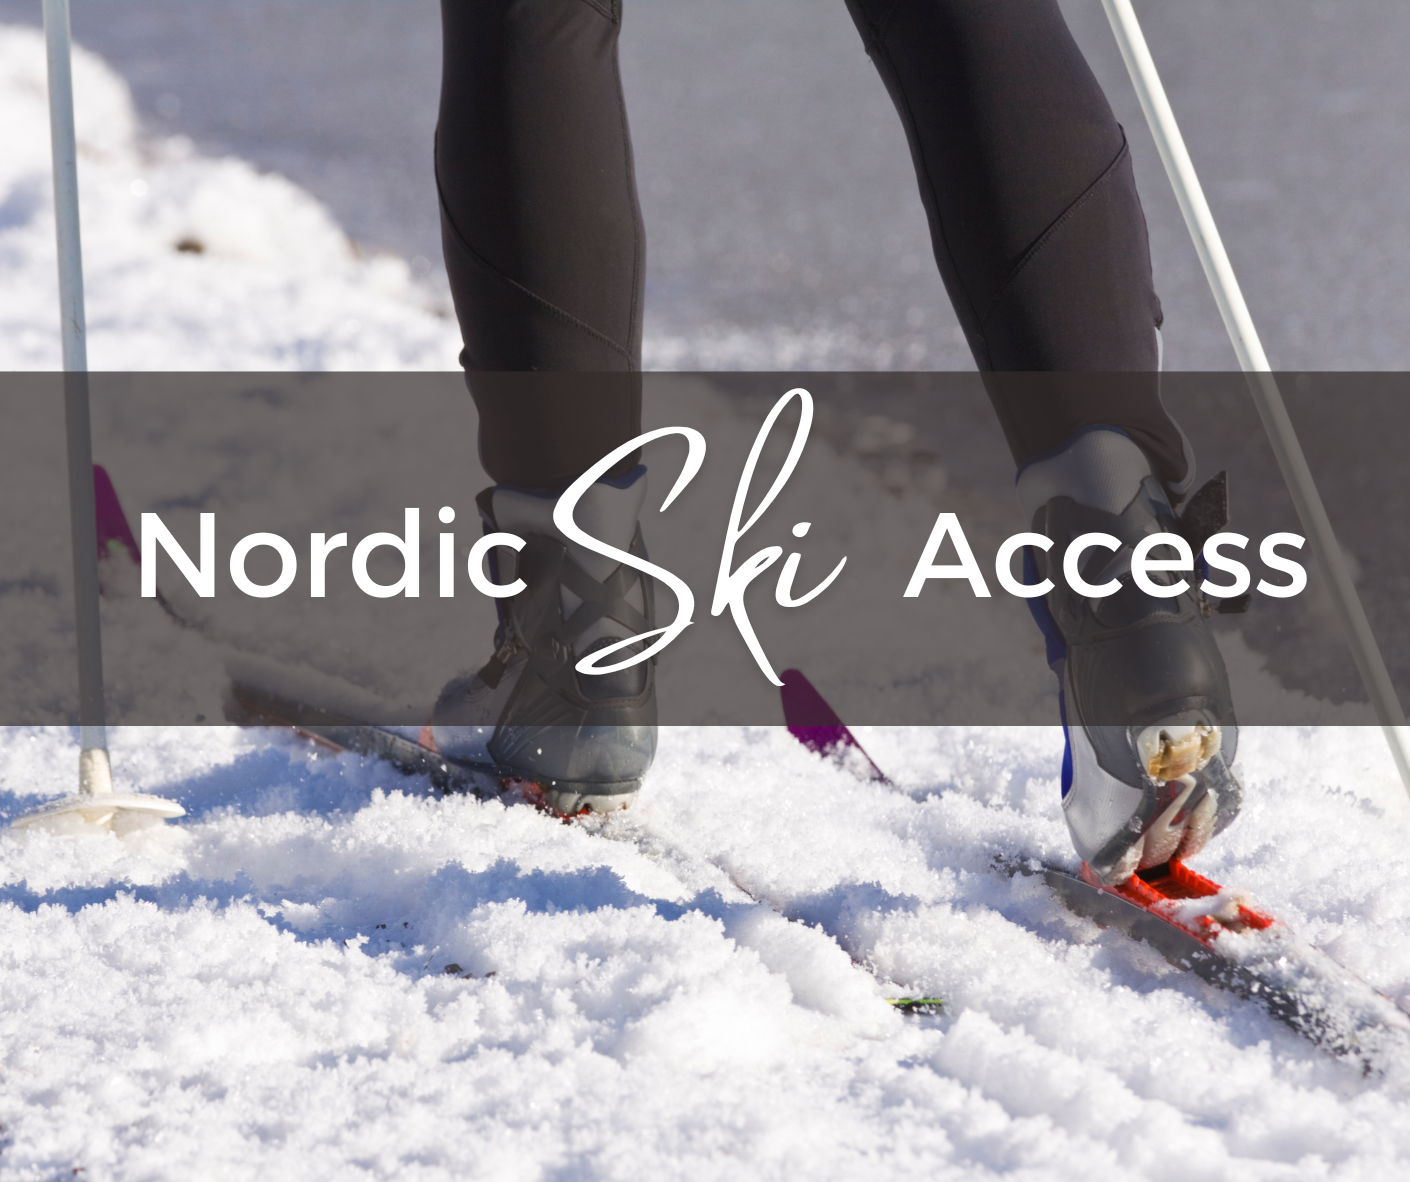 Nordic Skis with text overlay saying Nordic Ski Access